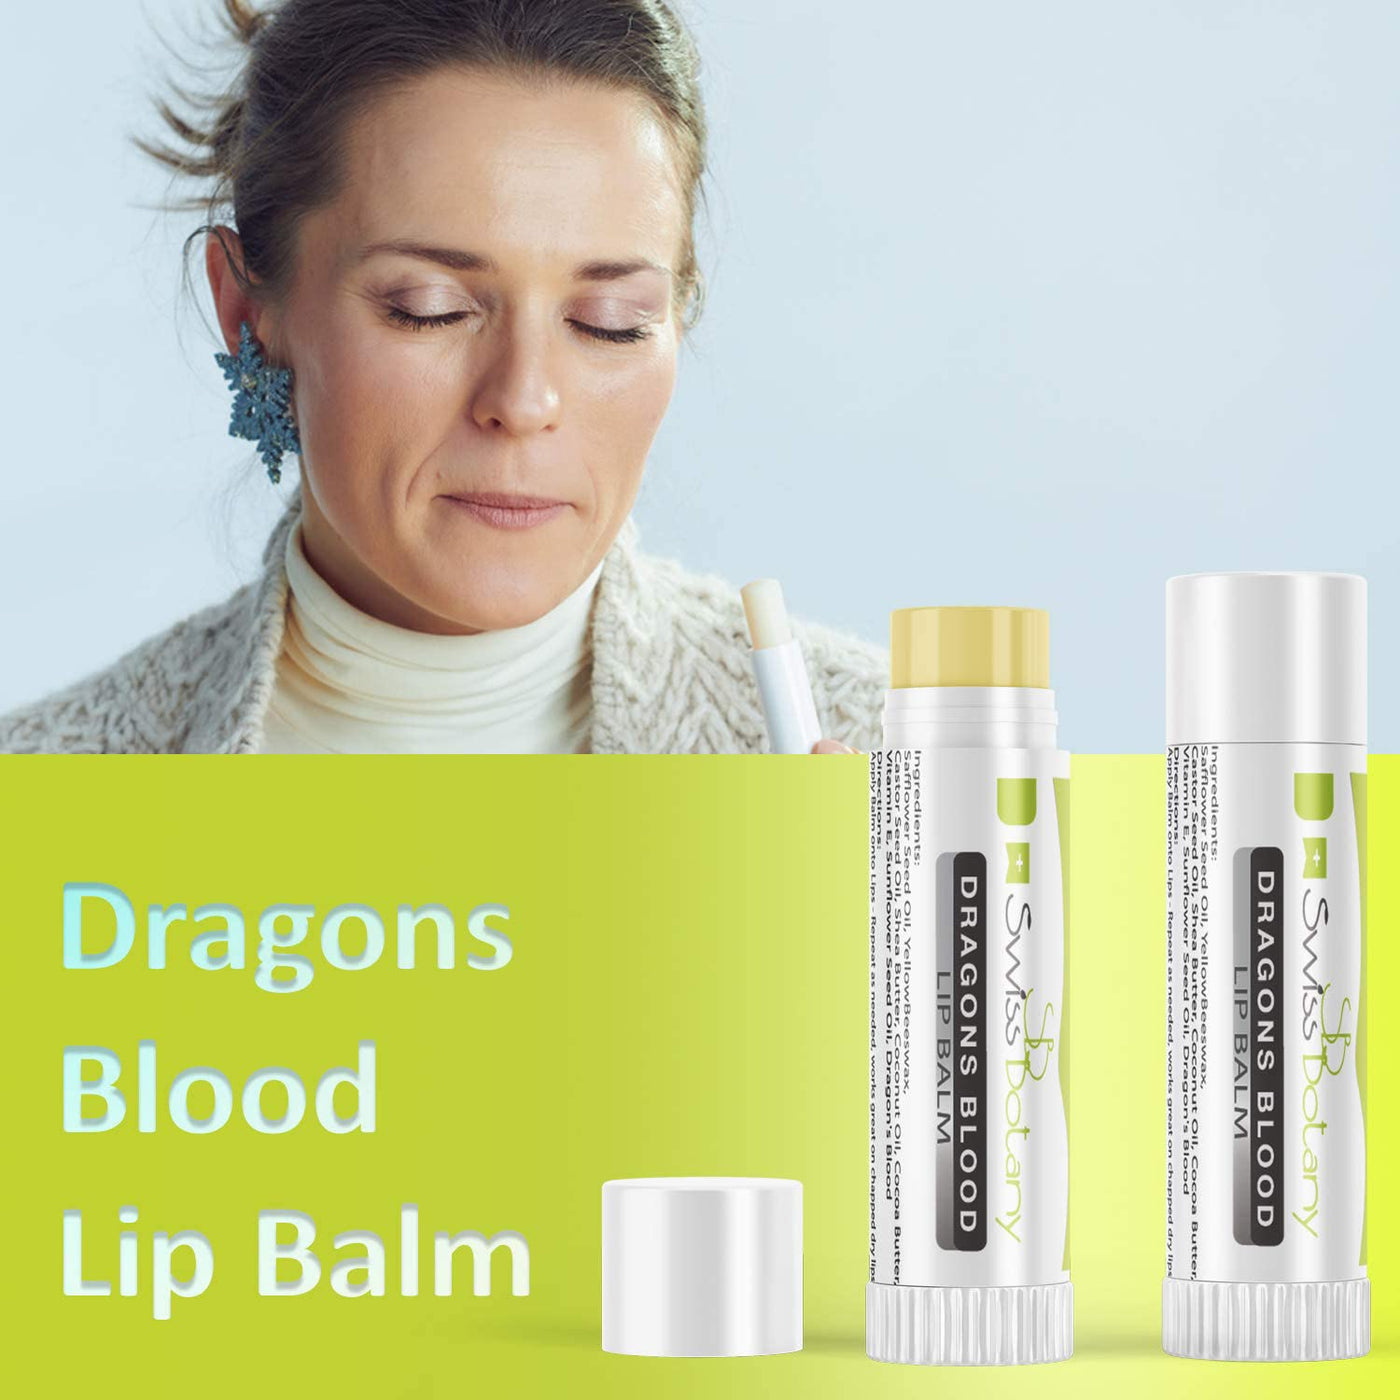 Swiss Botany Beauty 1 / Dragons Blood Intense Lip Balm Dragons Blood Genuine Organic Lip Balm Hydrating Lip Plumper for the Moisturized fuller Pouty Lips you've been craving| Professionally Trusted | Made in USA